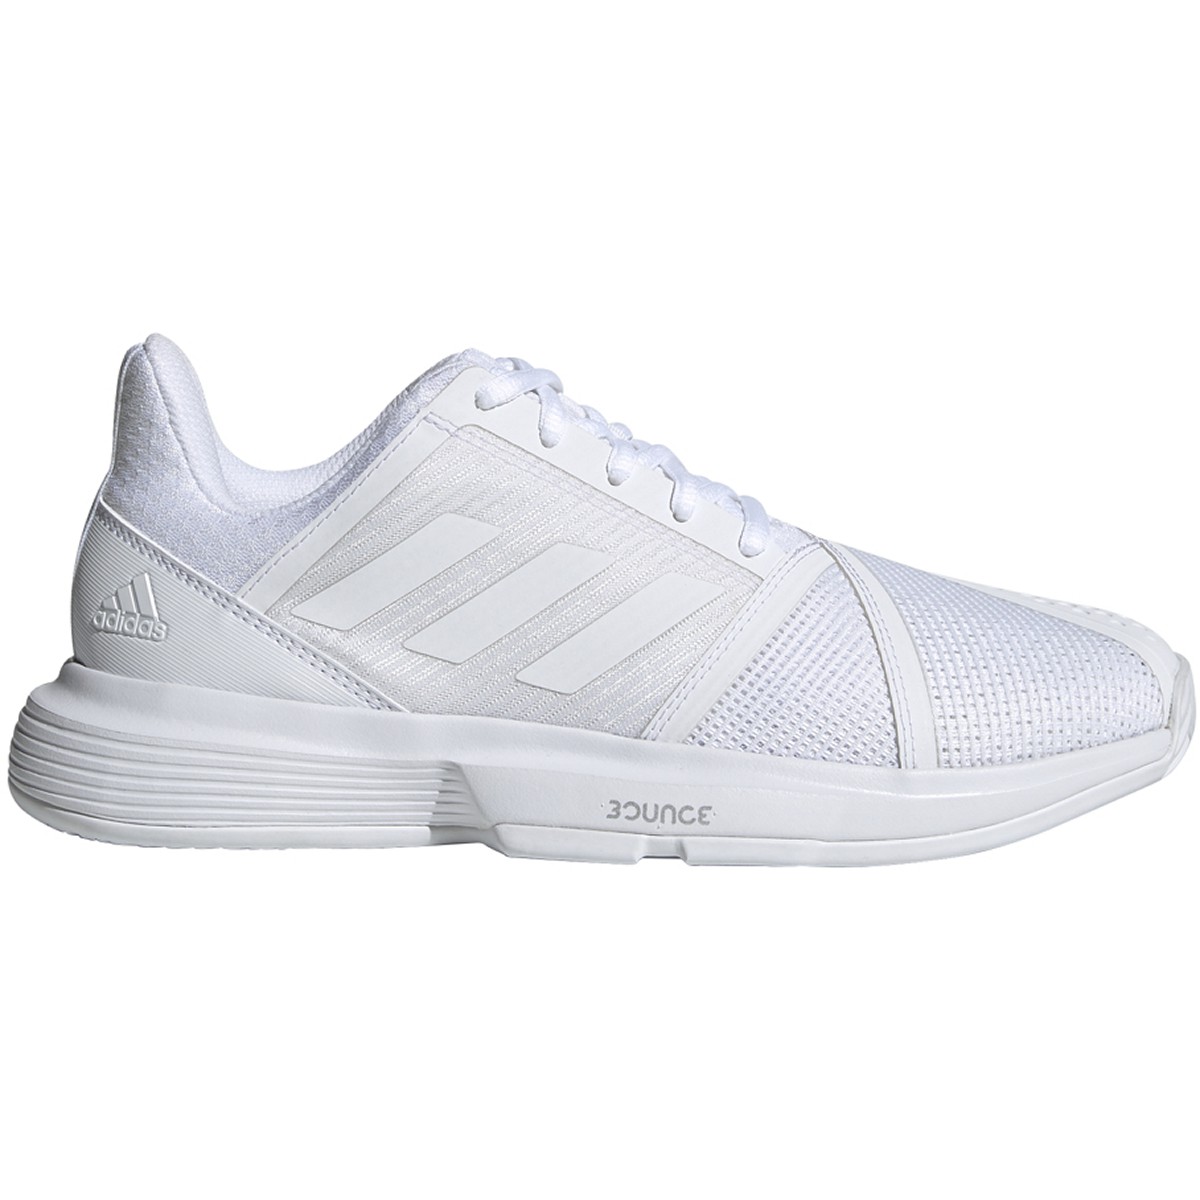 adidas courtjam bounce white